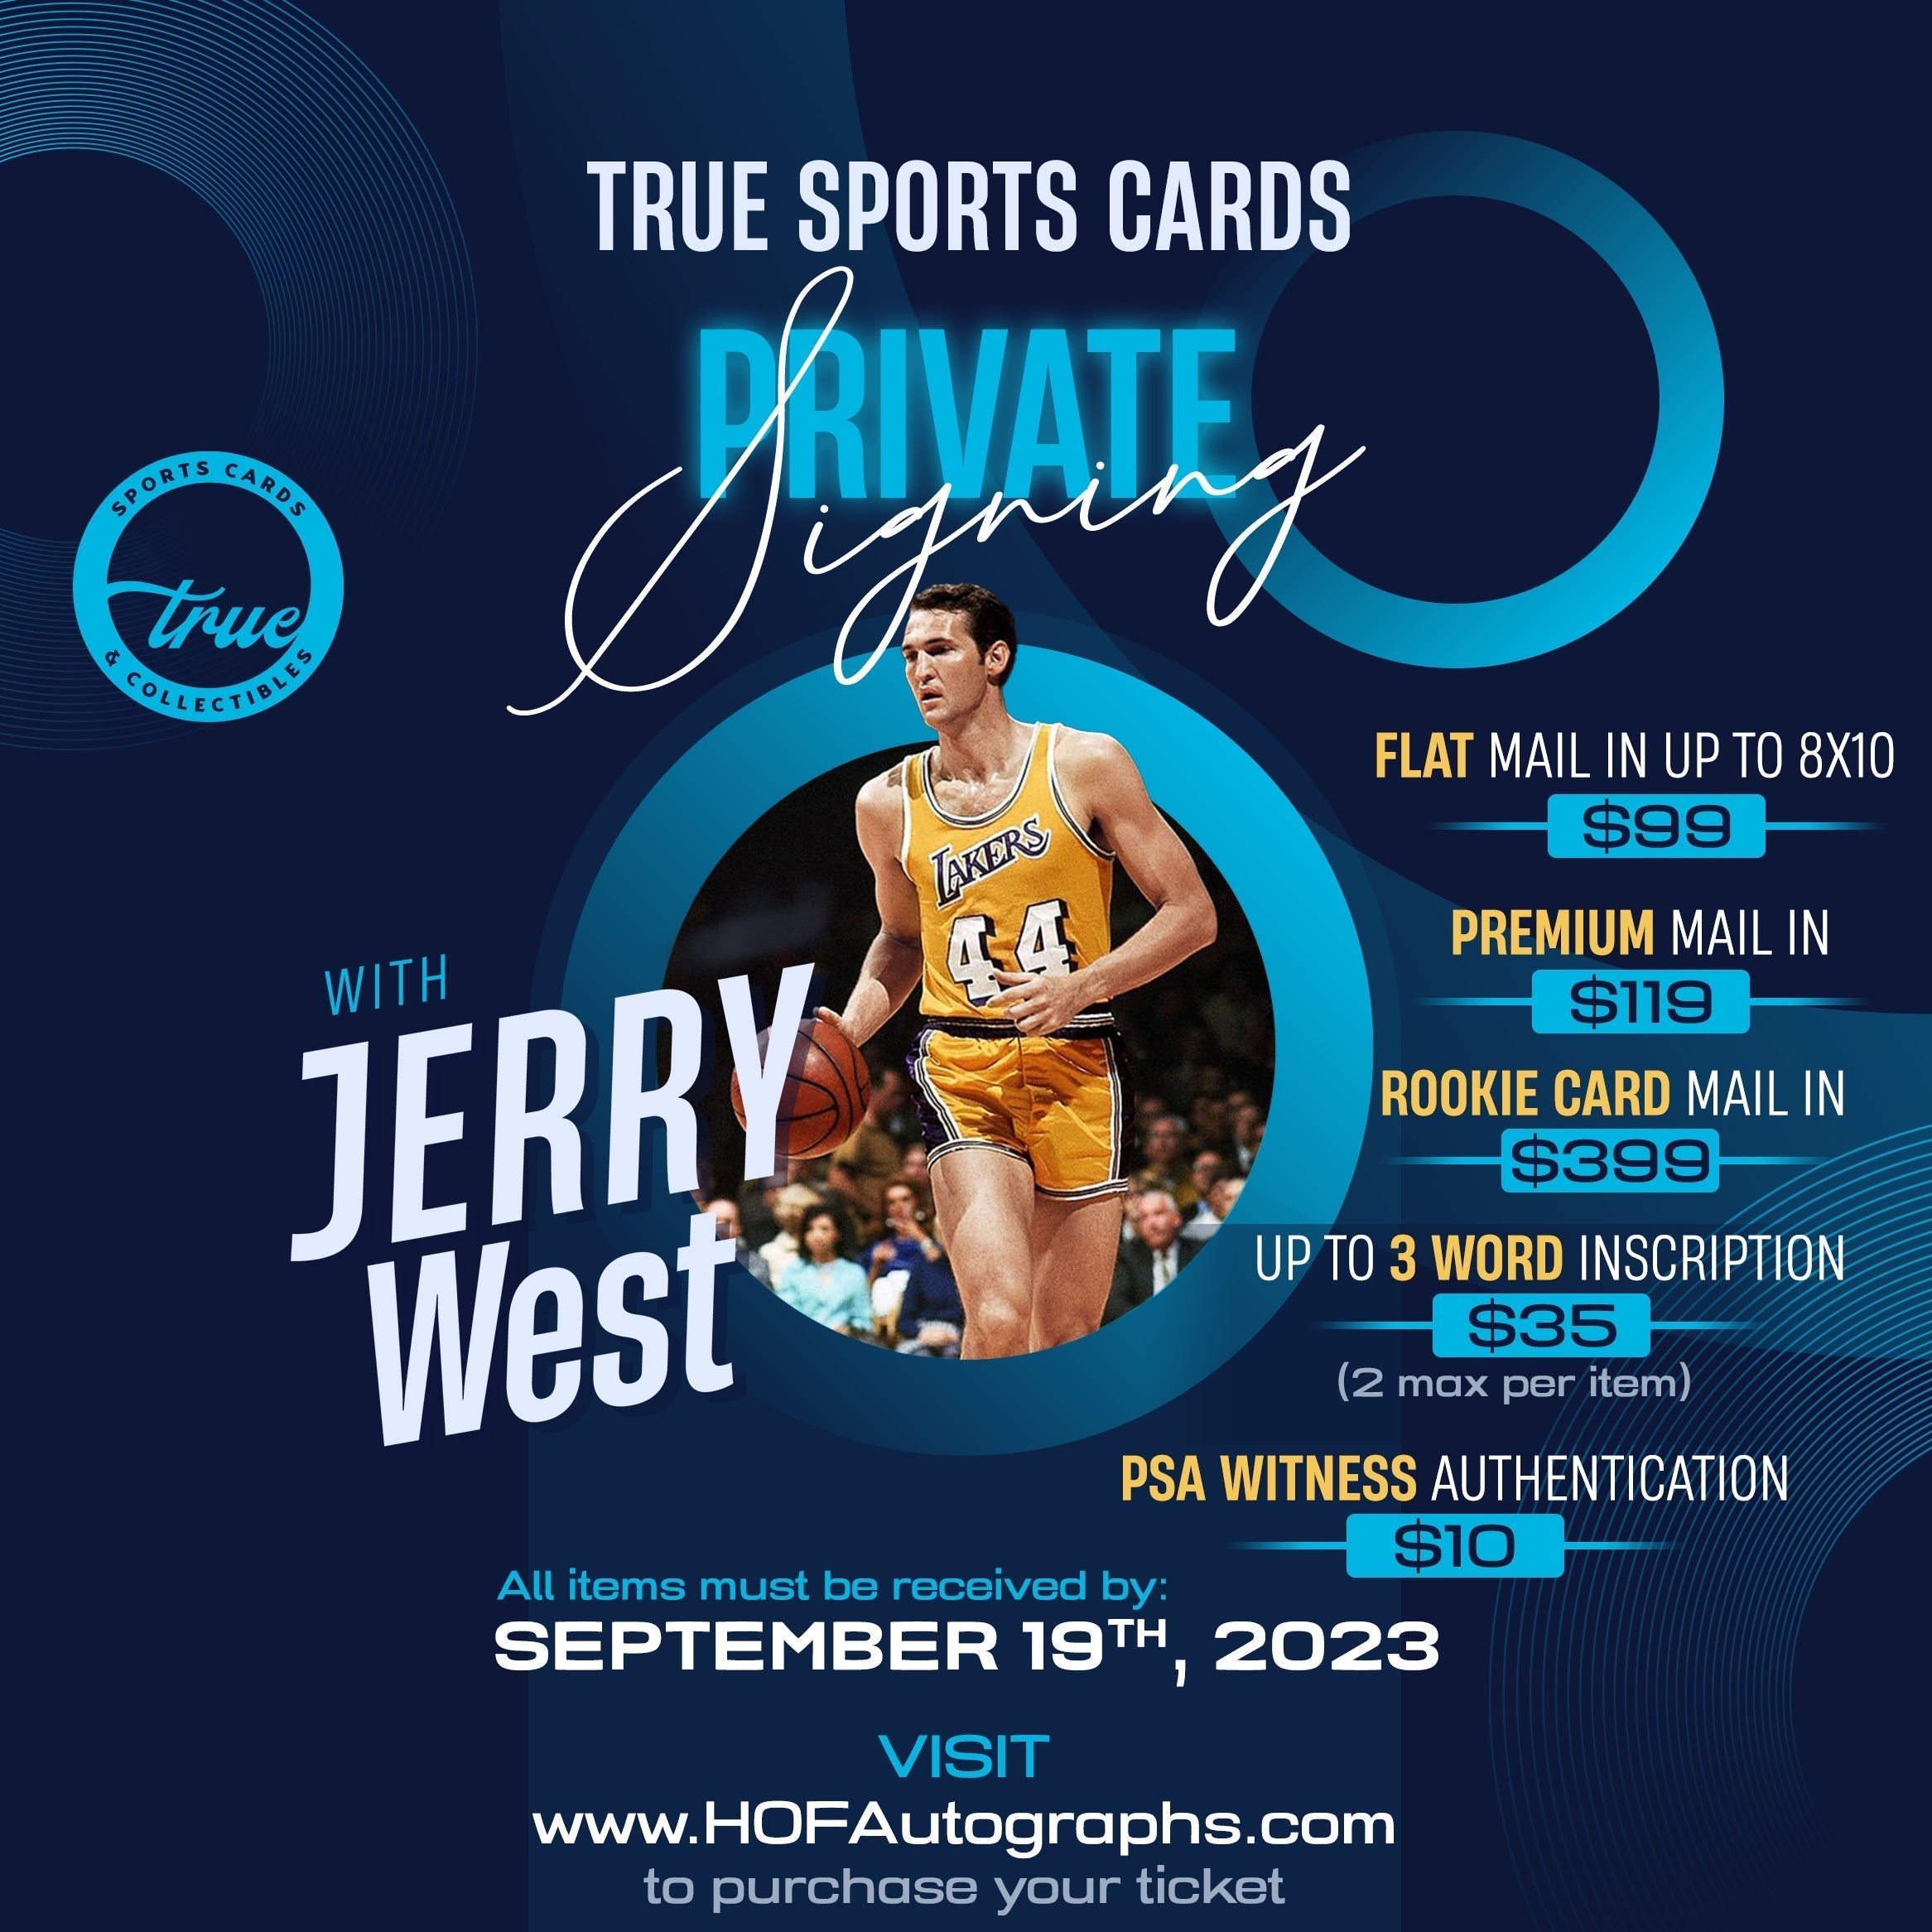 JERRY WEST PRIVATE SIGNING - PSA AUTHENTICATION FOR SEND IN ITEM - SEPTEMBER 2023